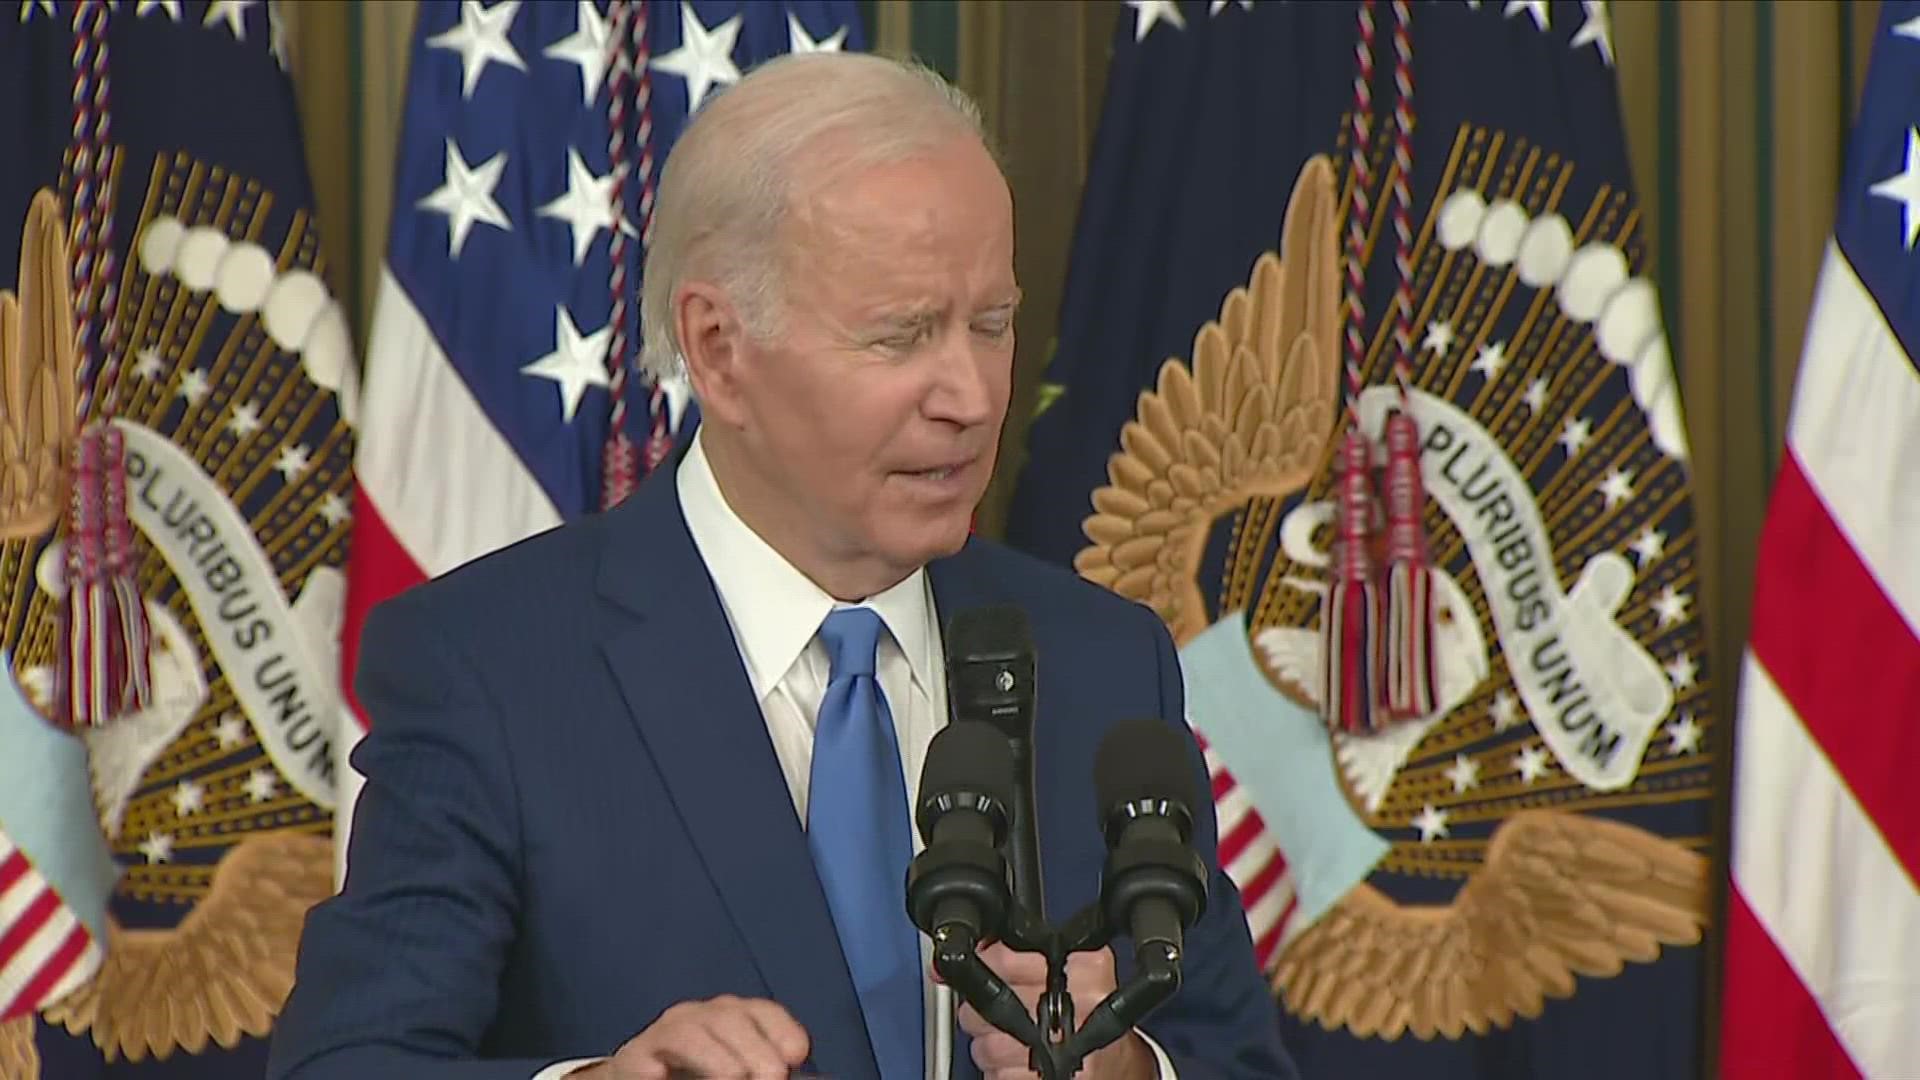 Biden said Wednesday he intends to run for reelection in 2024, but that "this is ultimately a family decision."